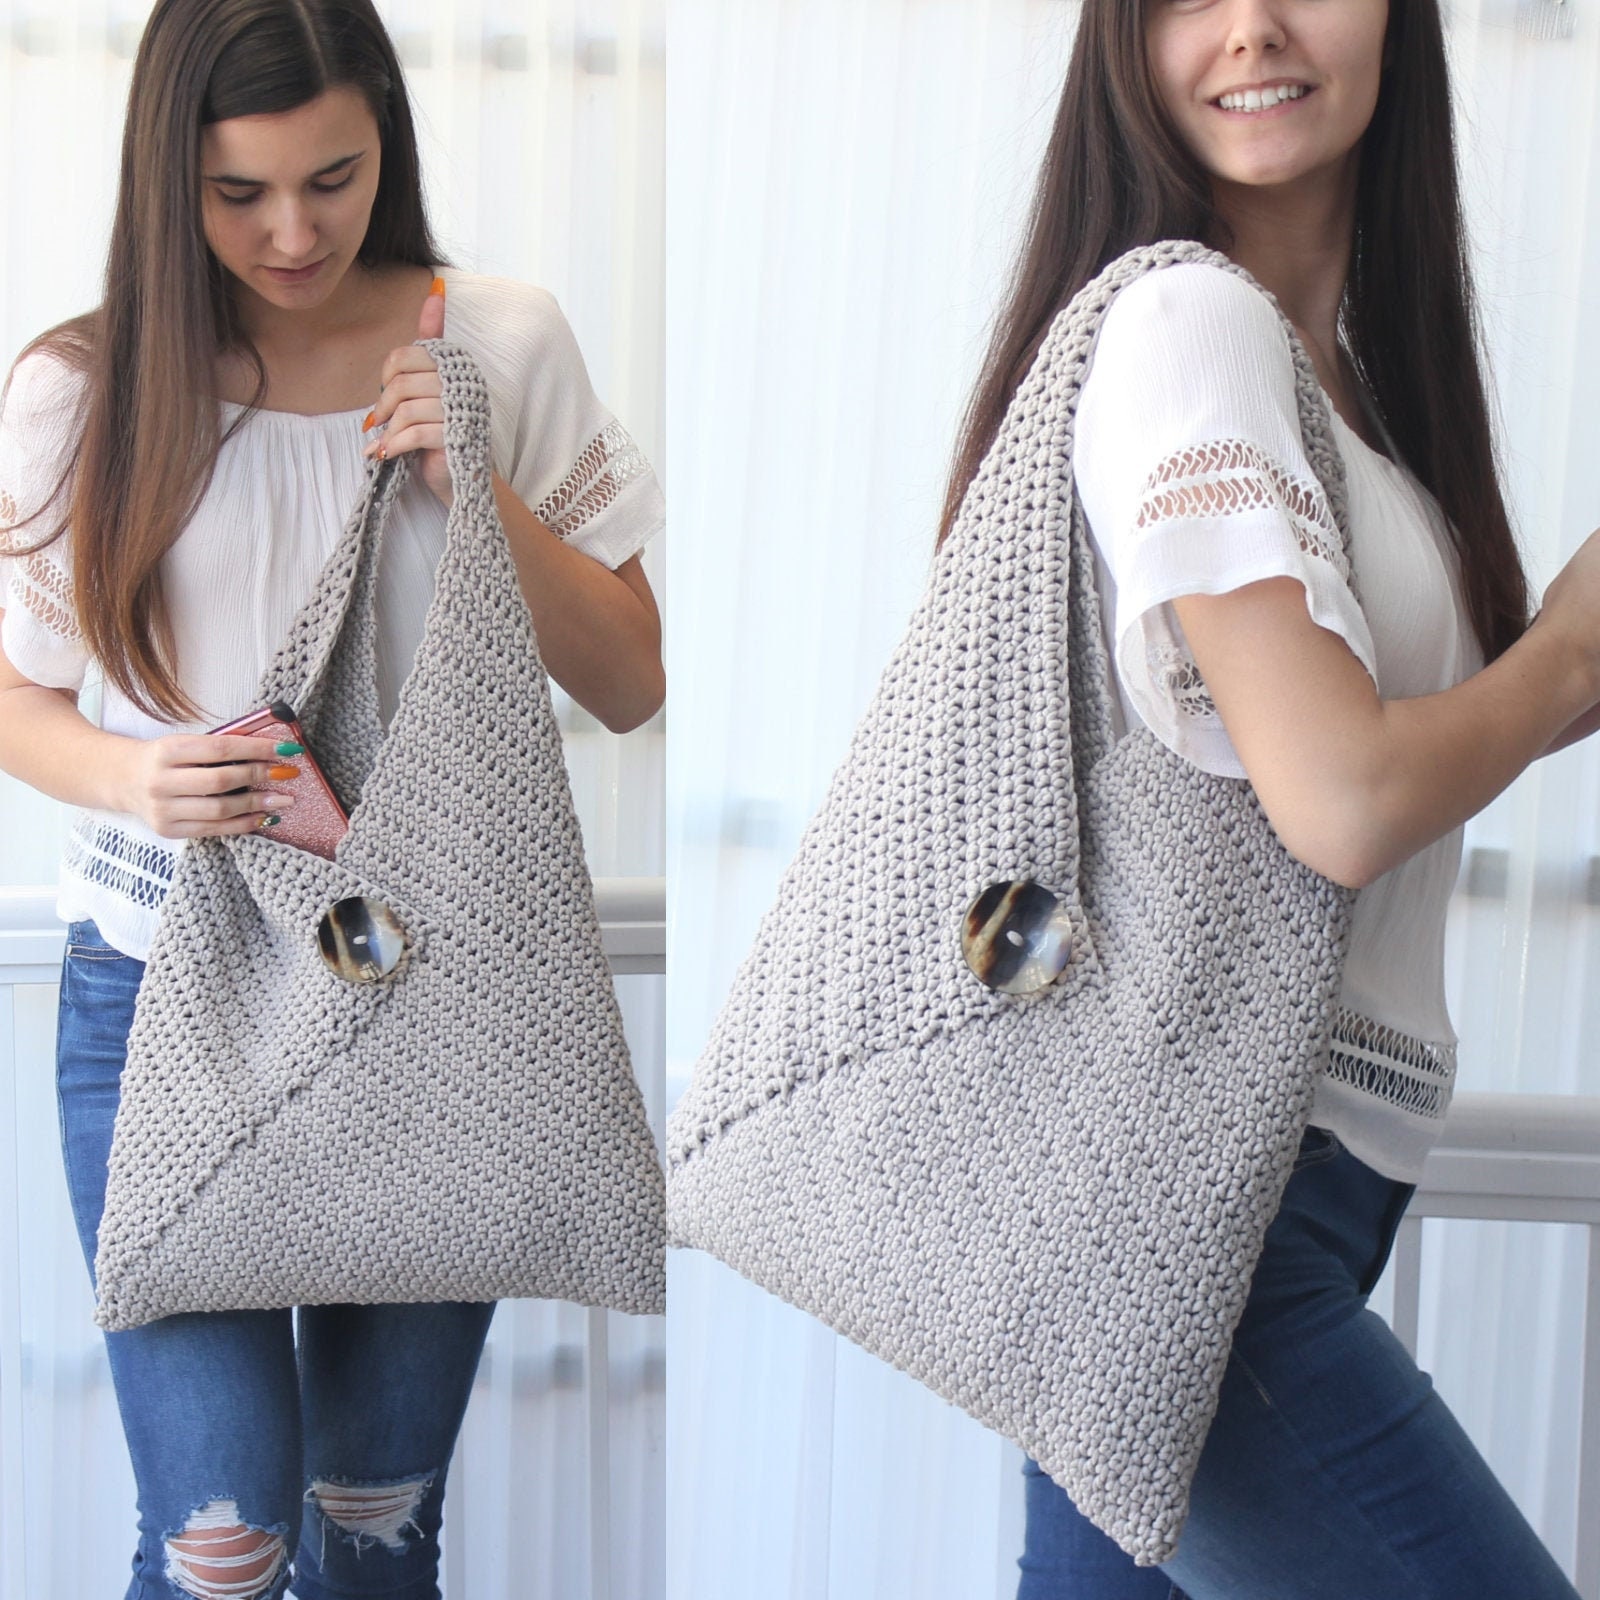 240 Best knitted bags ideas  knitted bags, bags, crochet bag